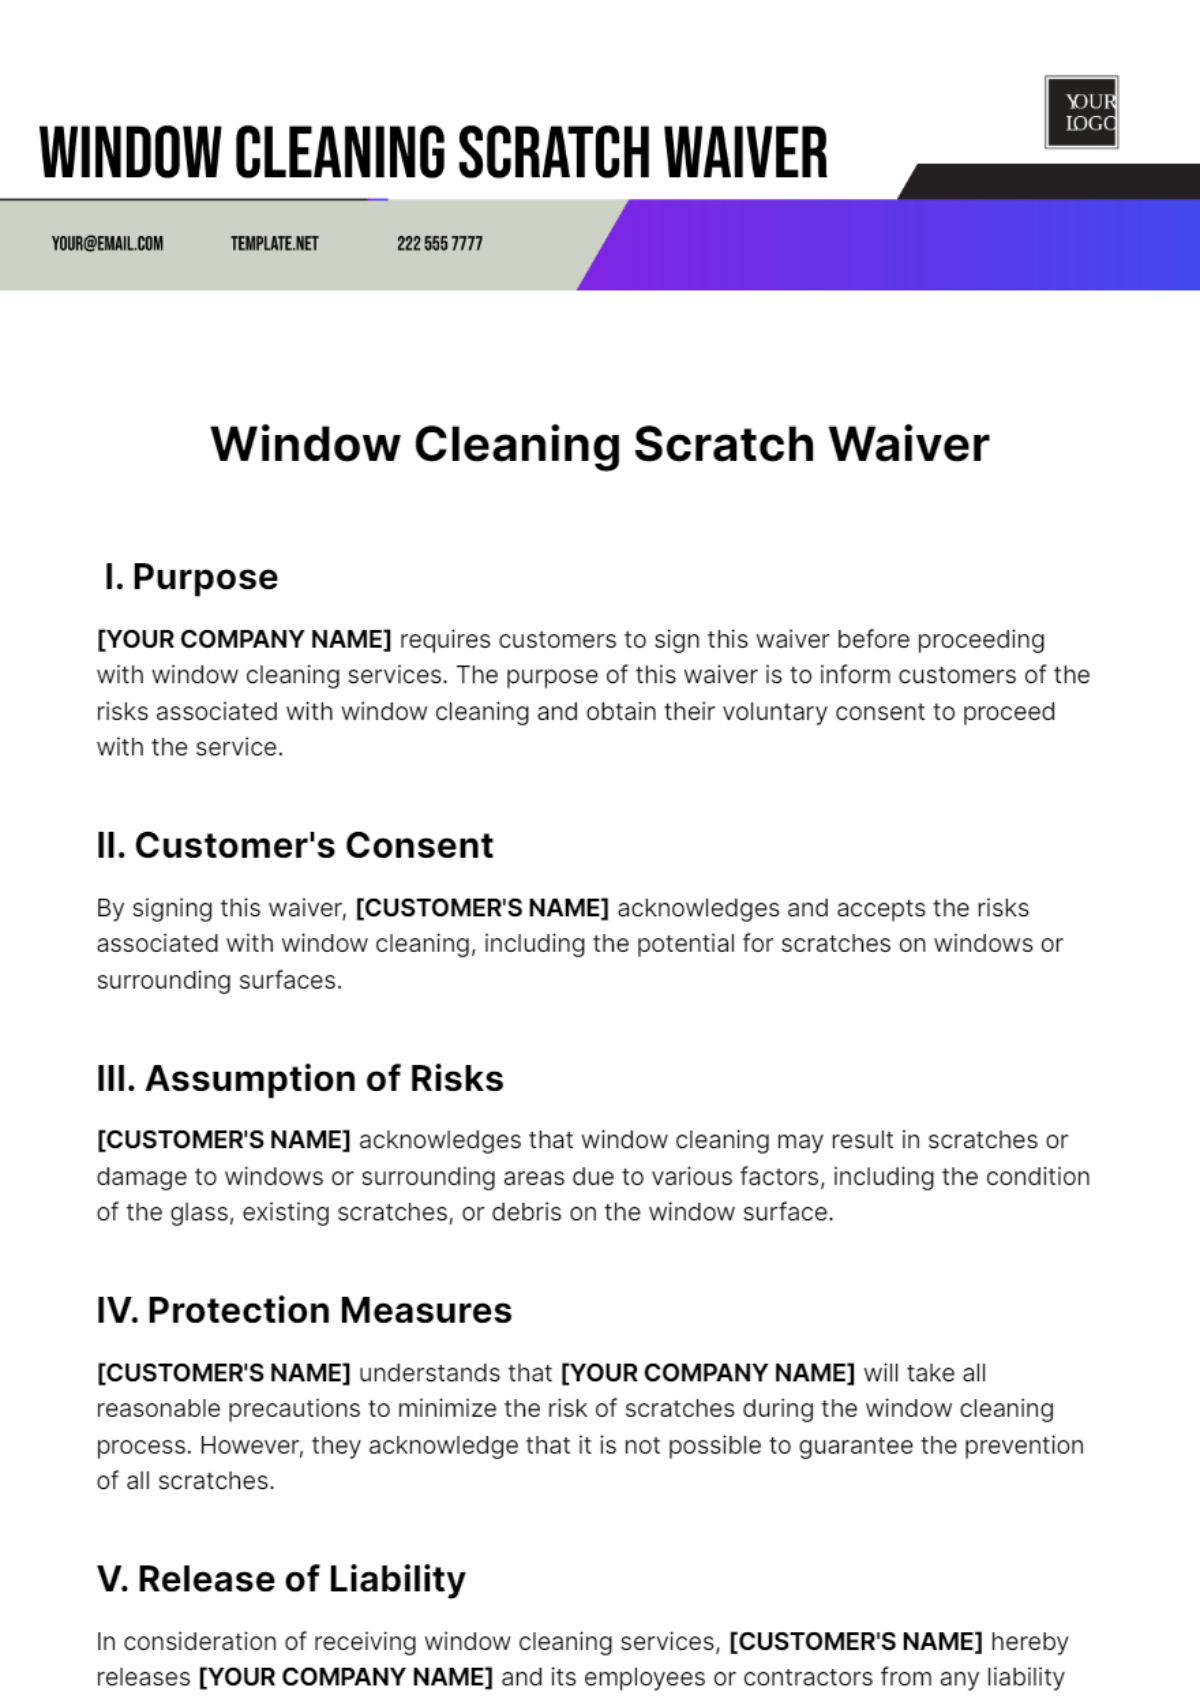 Window Cleaning Scratch Waiver Template